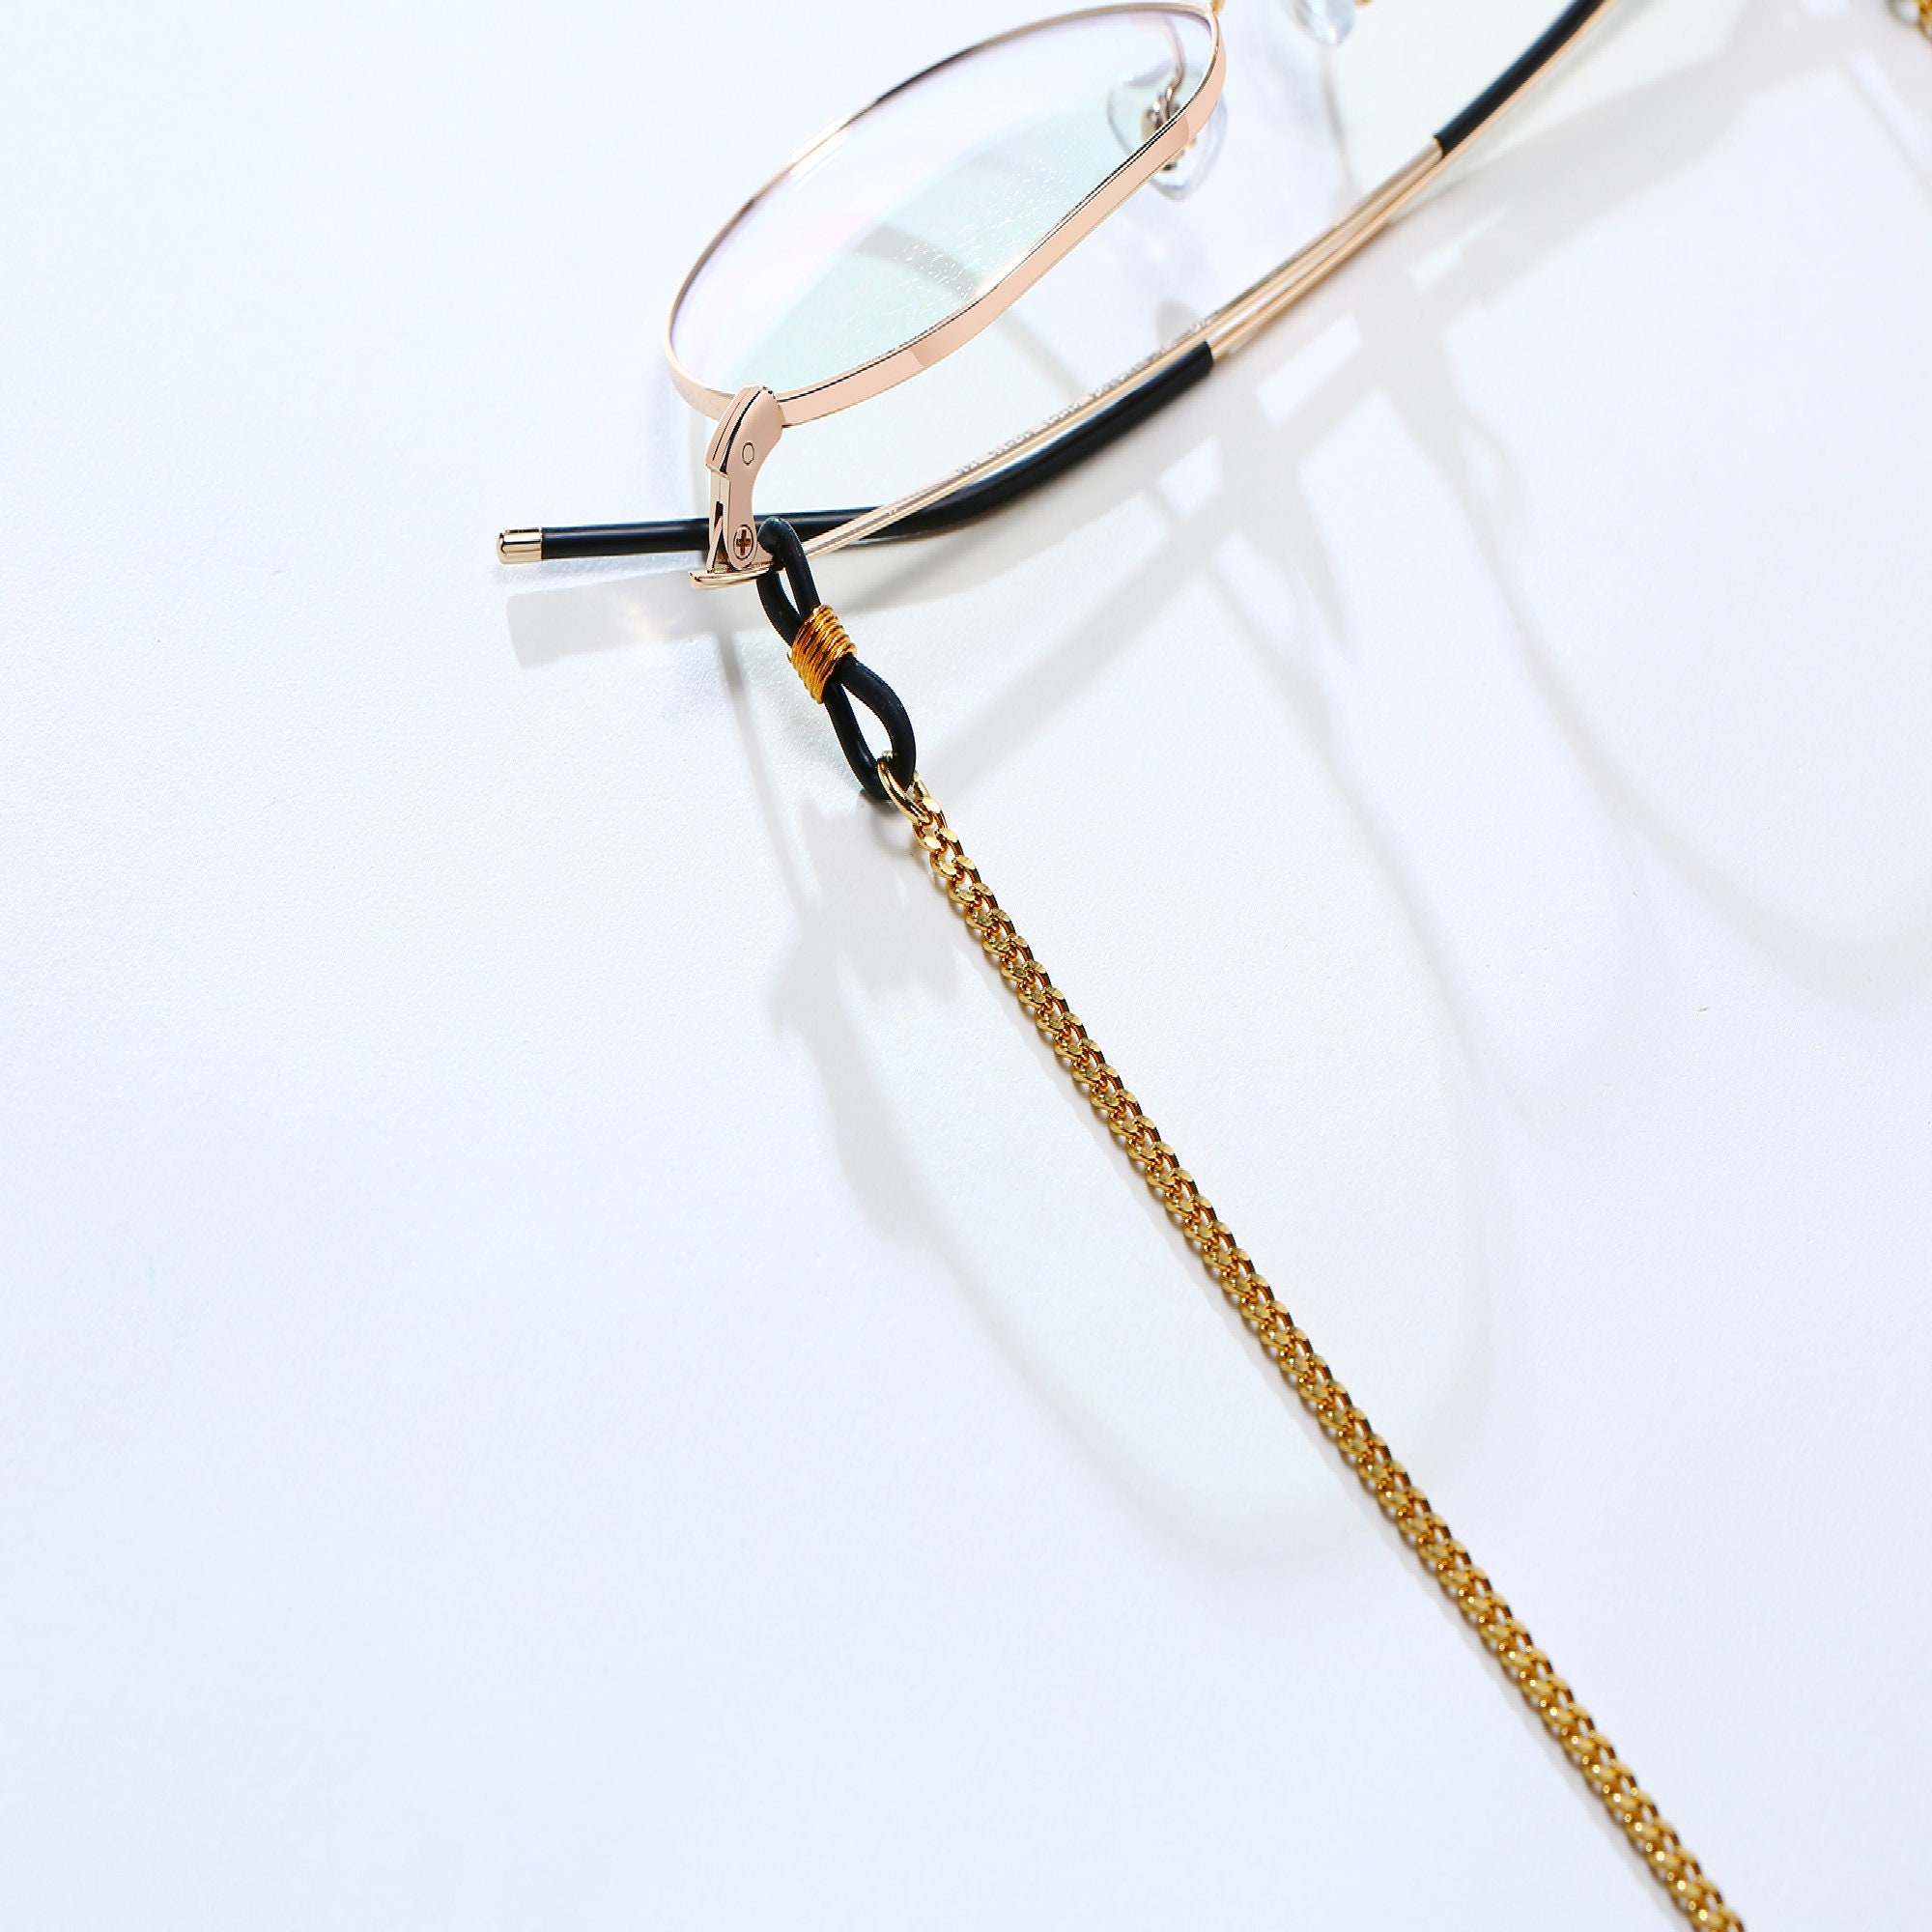 Wholesale Sunglasses Chain Masking Chain With Cross Pendant Gold And Silver  Eyewear Lanyard For Glasses And Eyeglasses From Timeshopp, $10.86